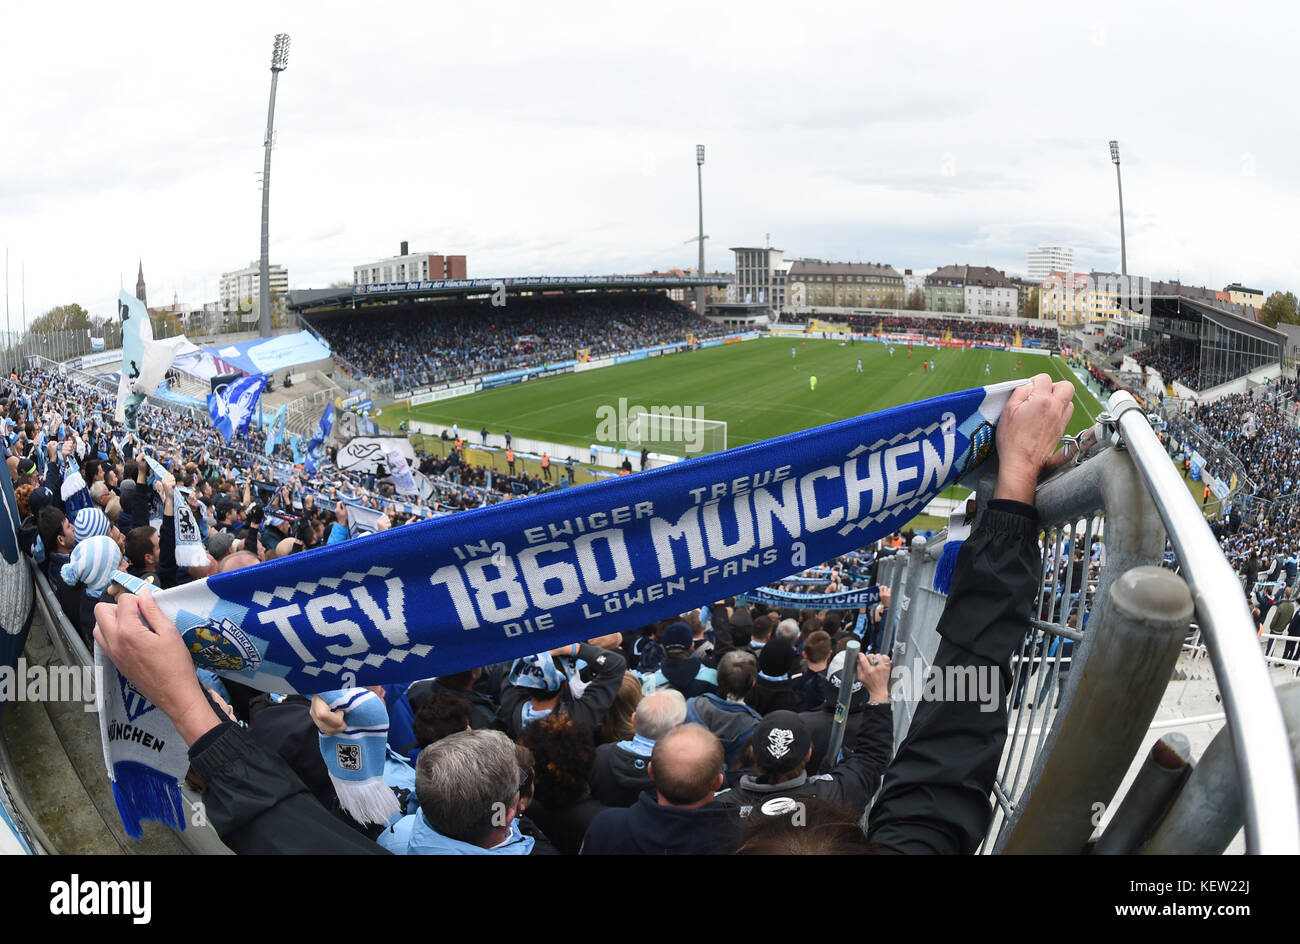 1860 Munich drop into Germany's third tier amid chaos at the Allianz Arena  with angry fans turning violent in stands